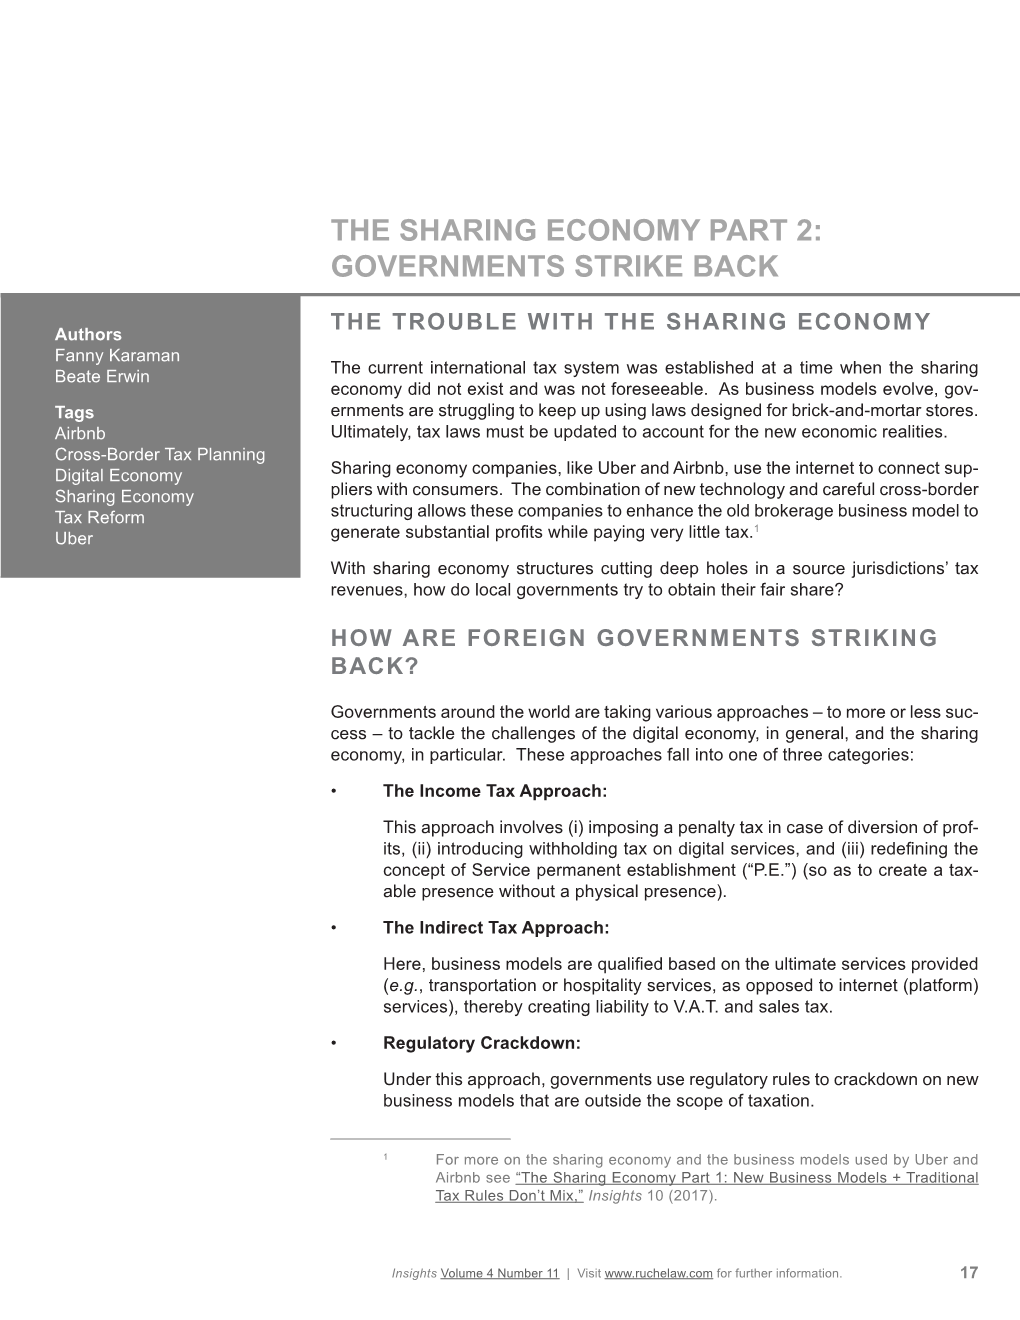 The Sharing Economy Part 2: Governments Strike Back